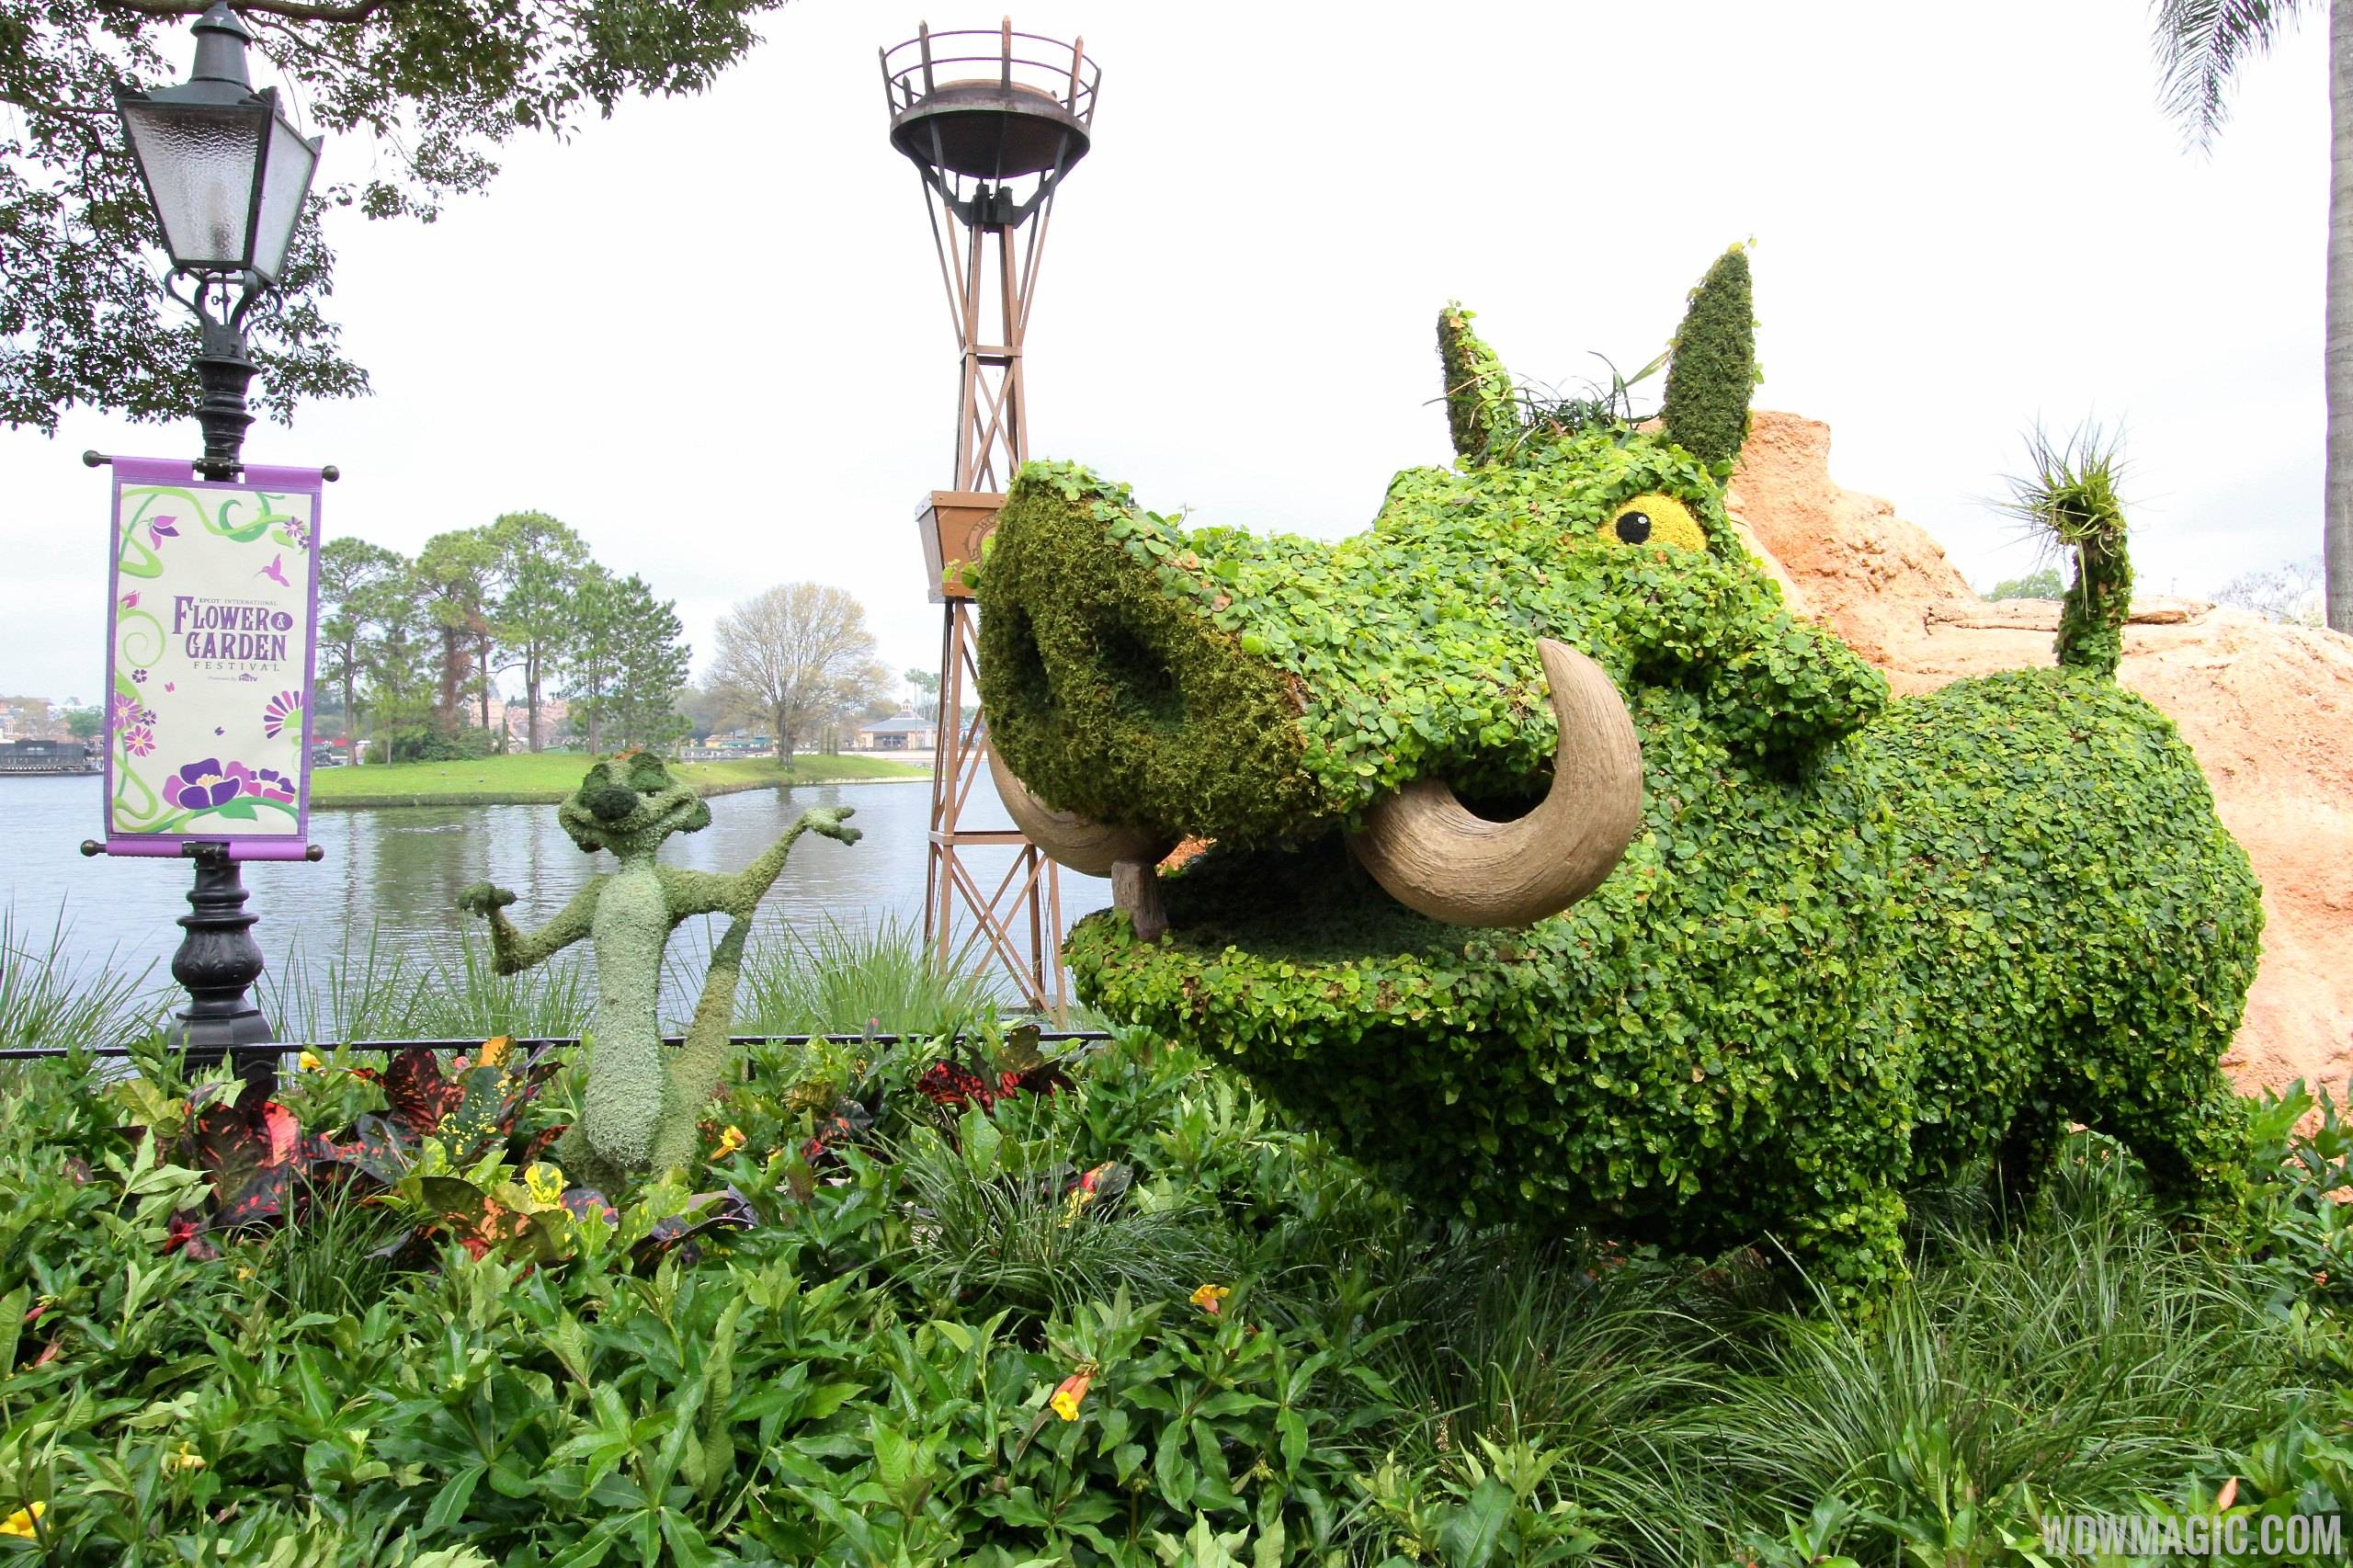 2014 Epcot Flower and Garden Festival - Lion King Timon and Pumba topiary